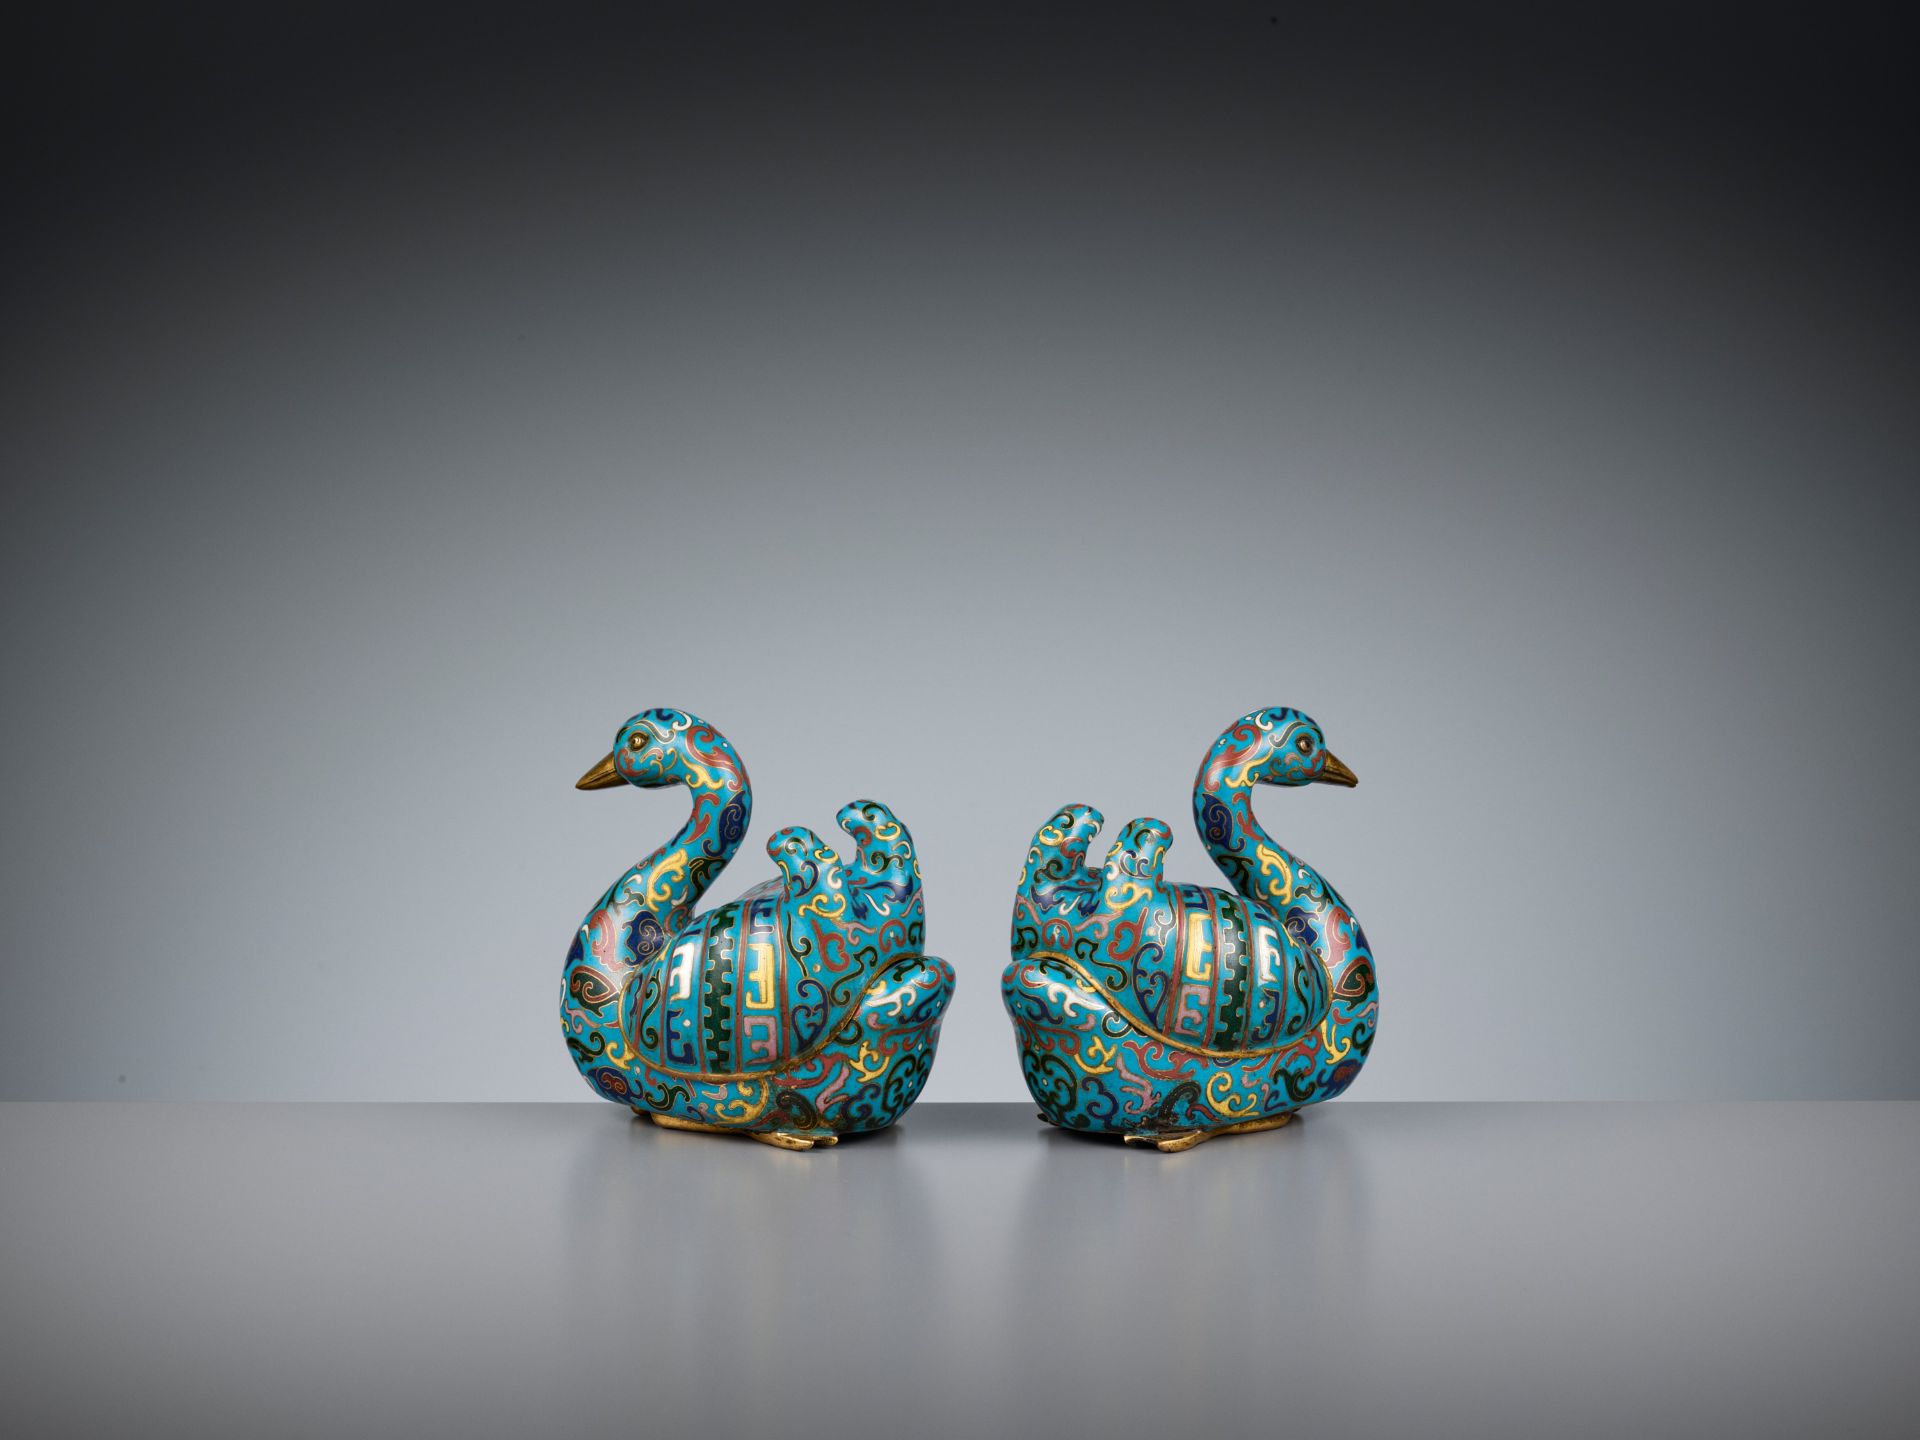 A PAIR OF GILT-BRONZE CLOISONNE ENAMEL 'DUCK' CENSER AND COVERS, LATE QING DYNASTY - Image 5 of 11